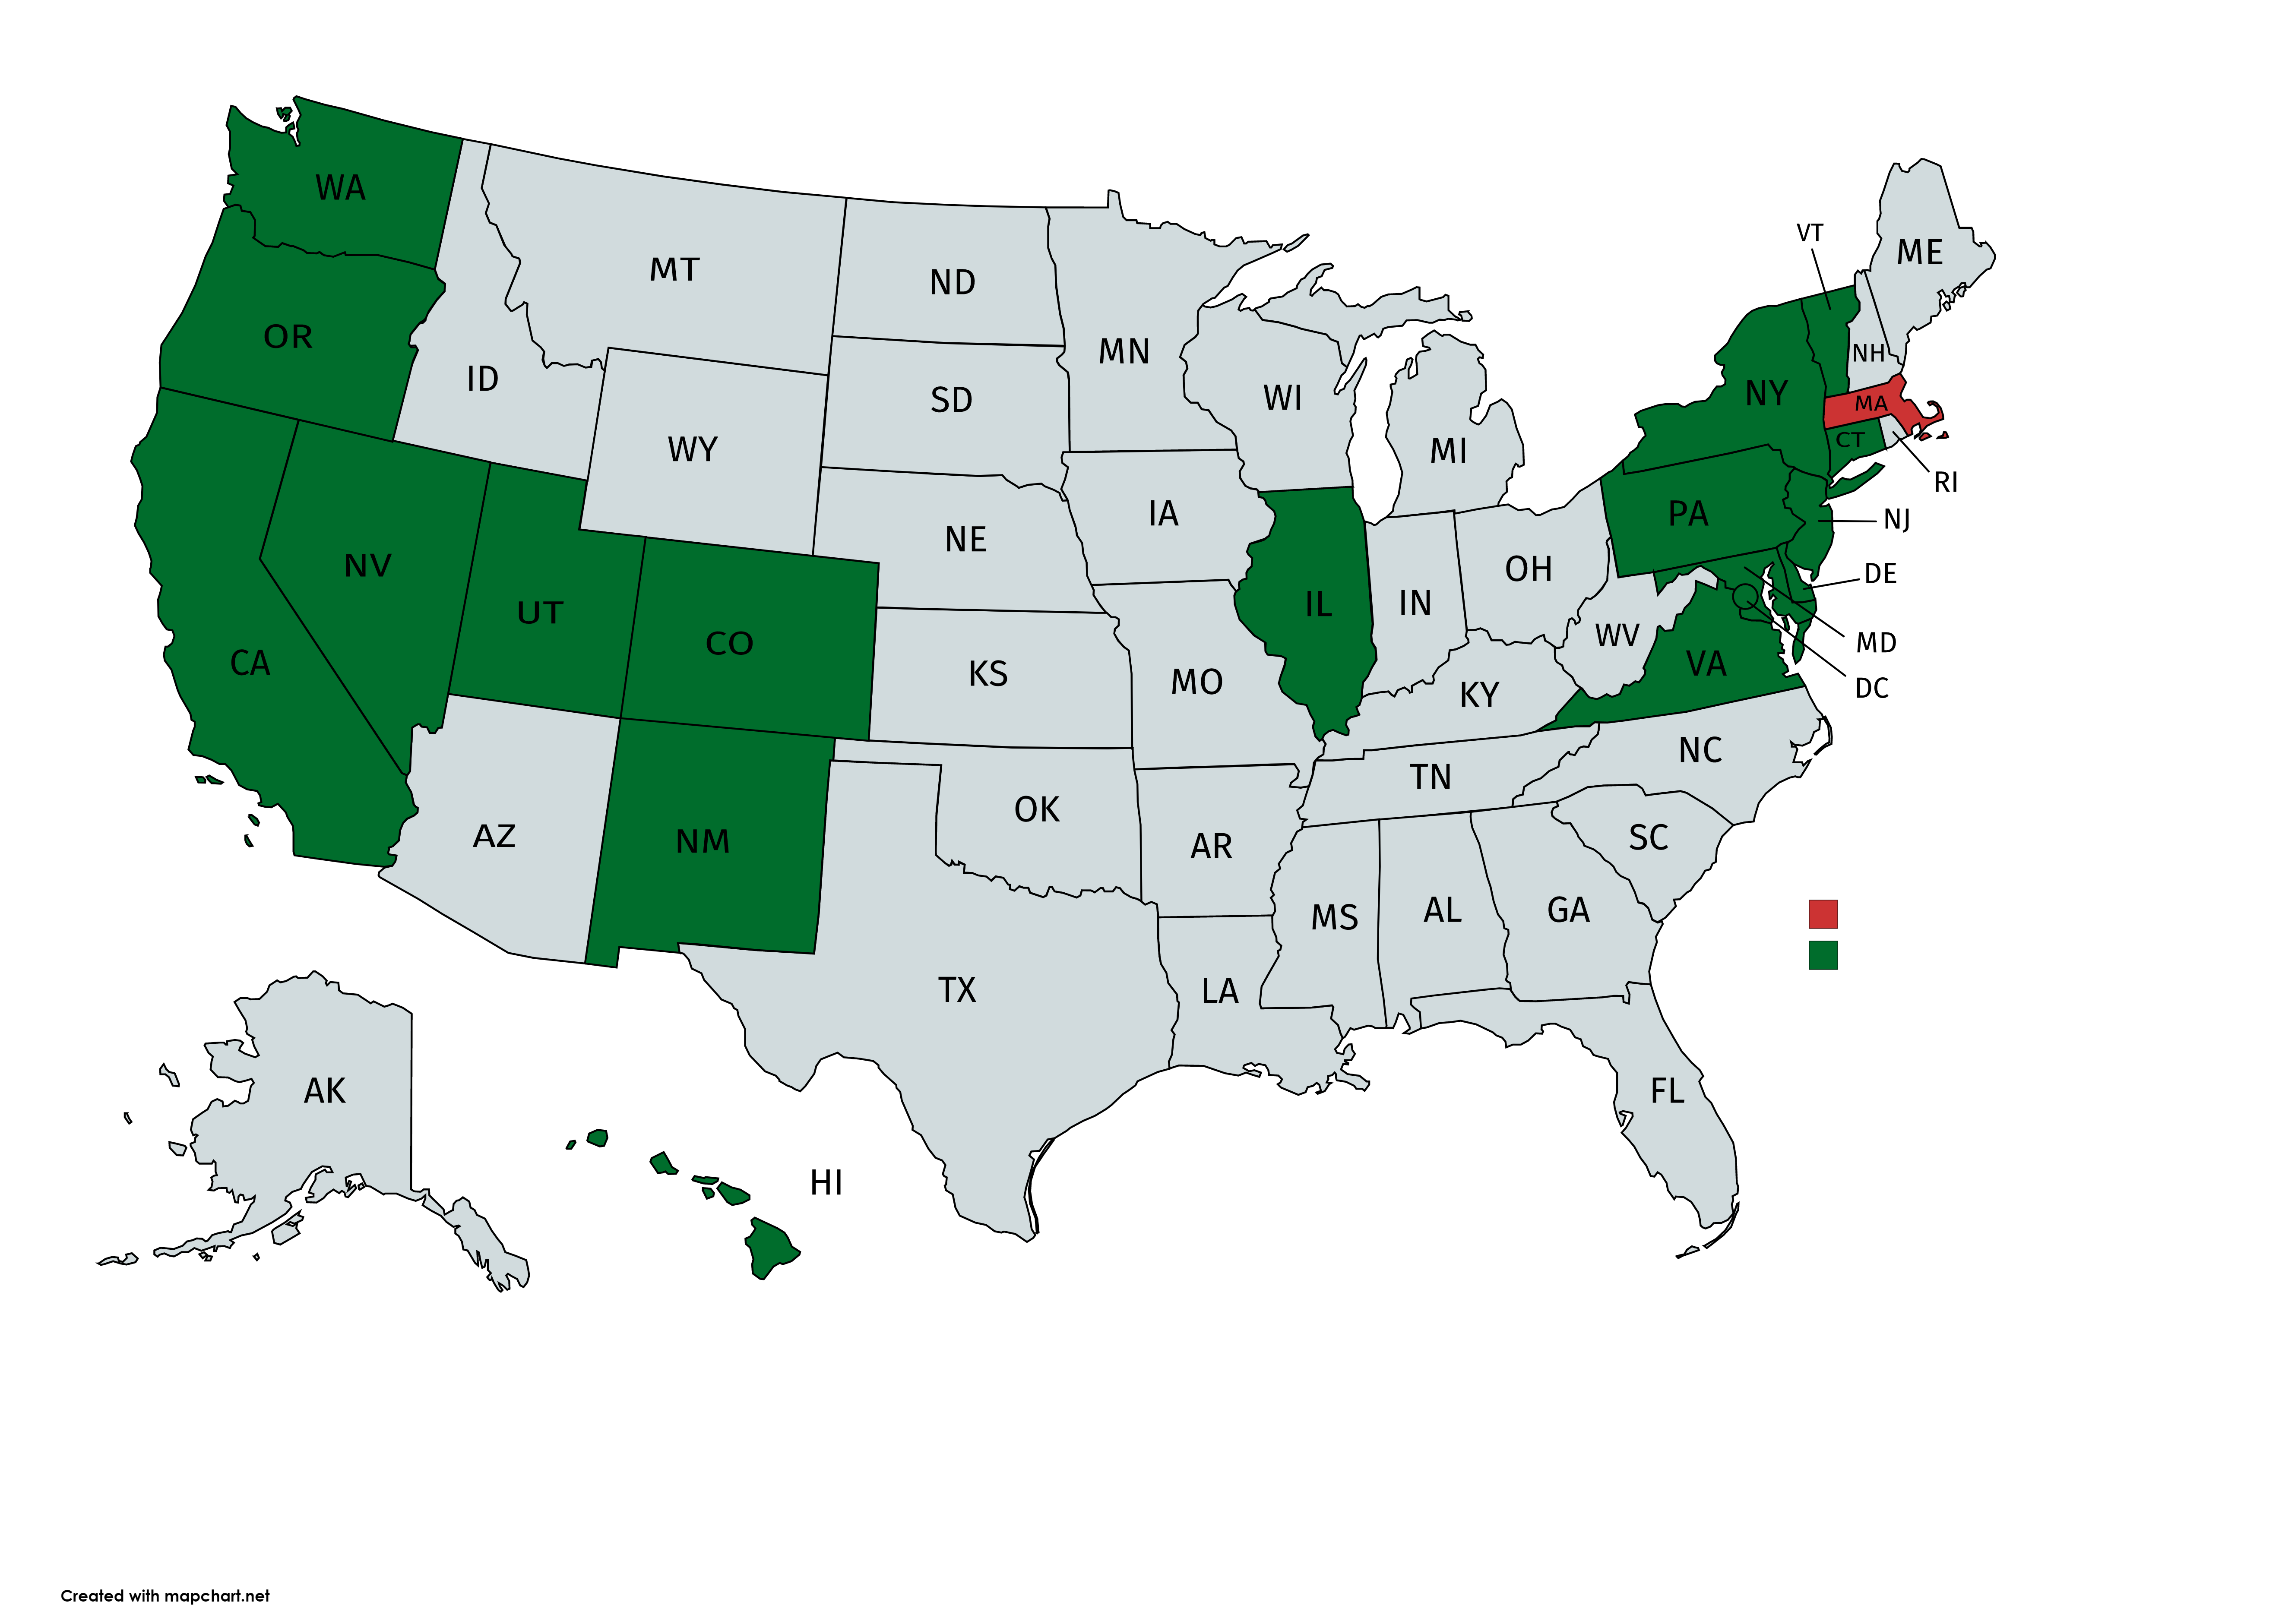 16 States & DC offer licenses to the undocumented